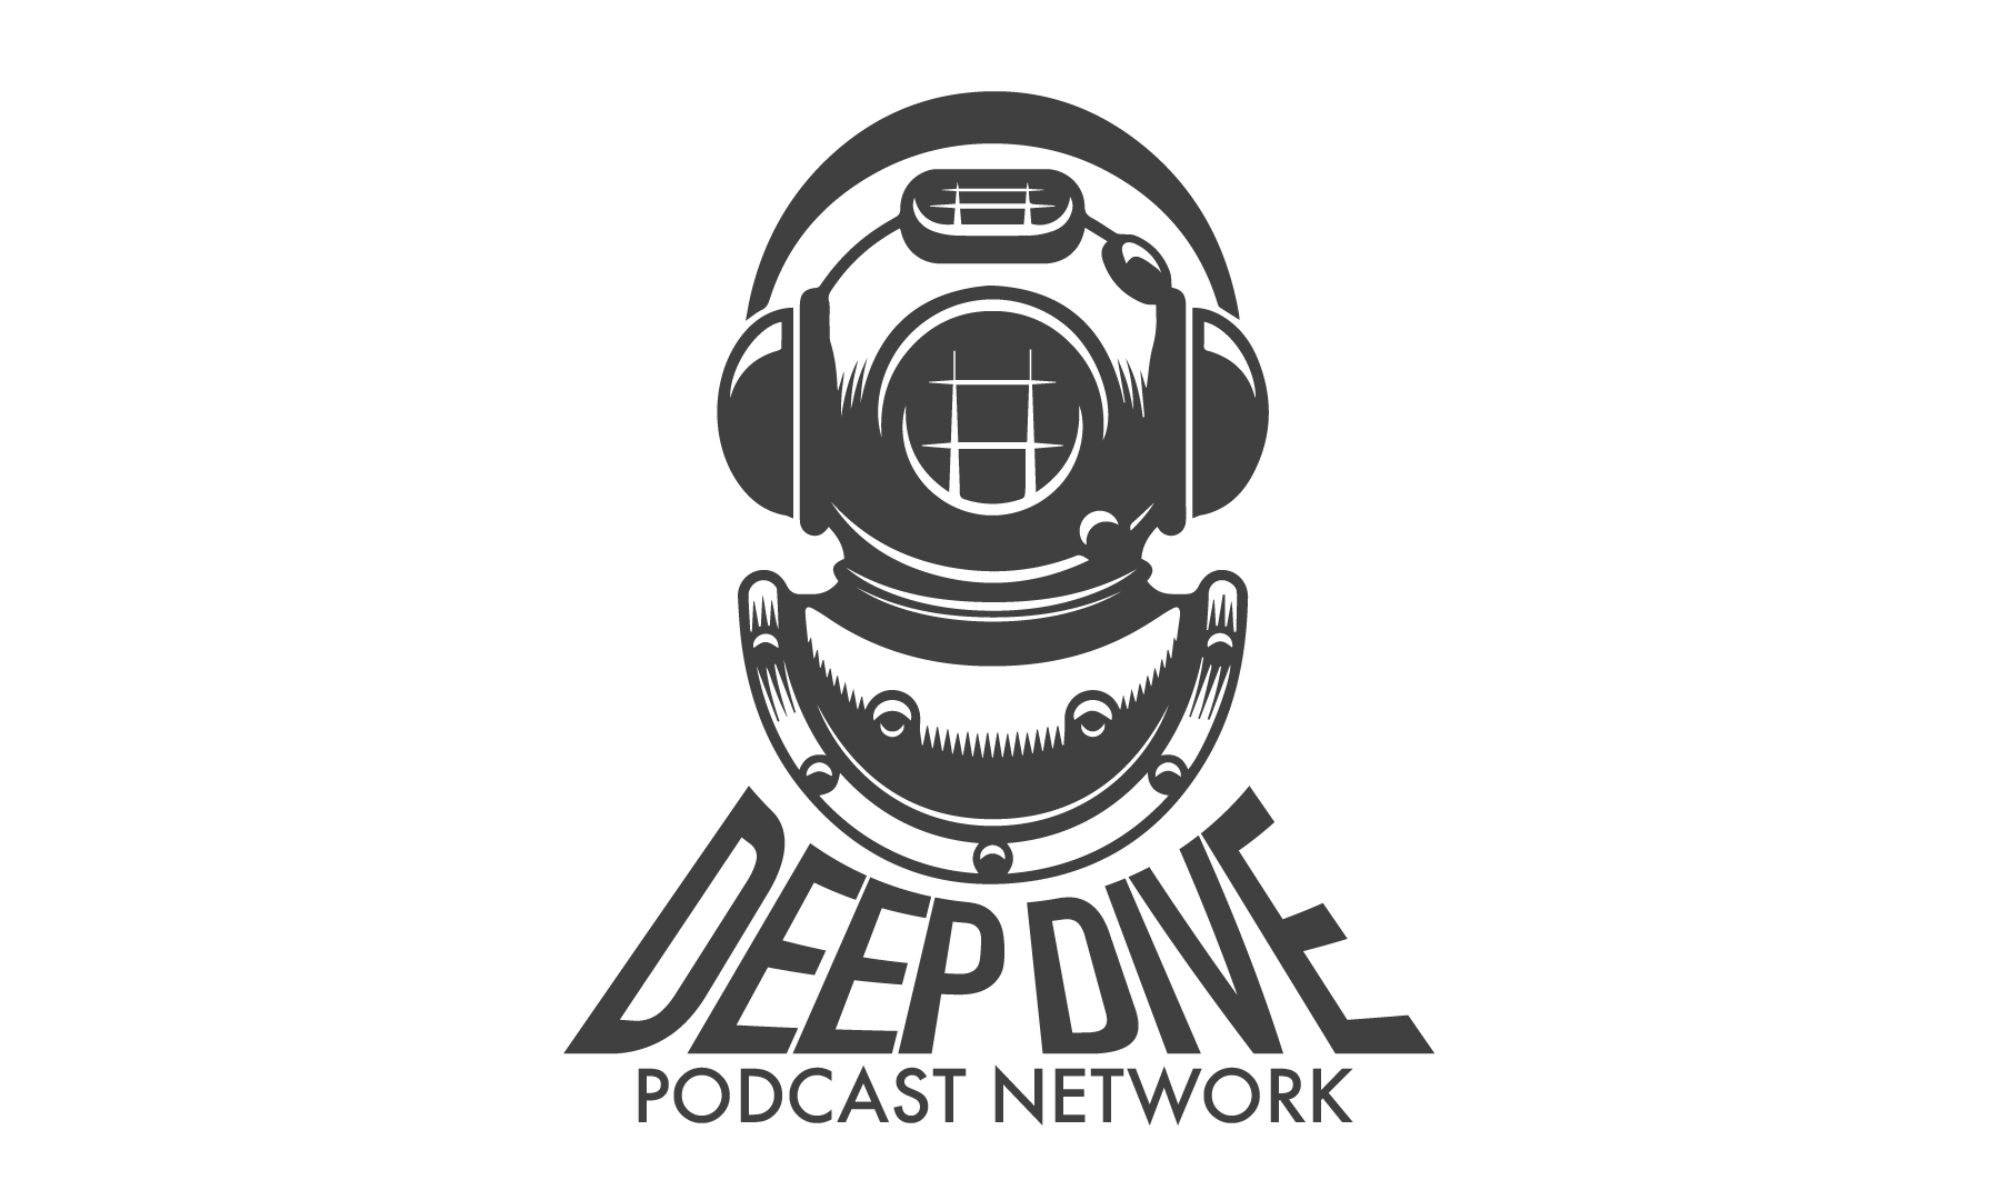 The Deep Dive Podcast Network